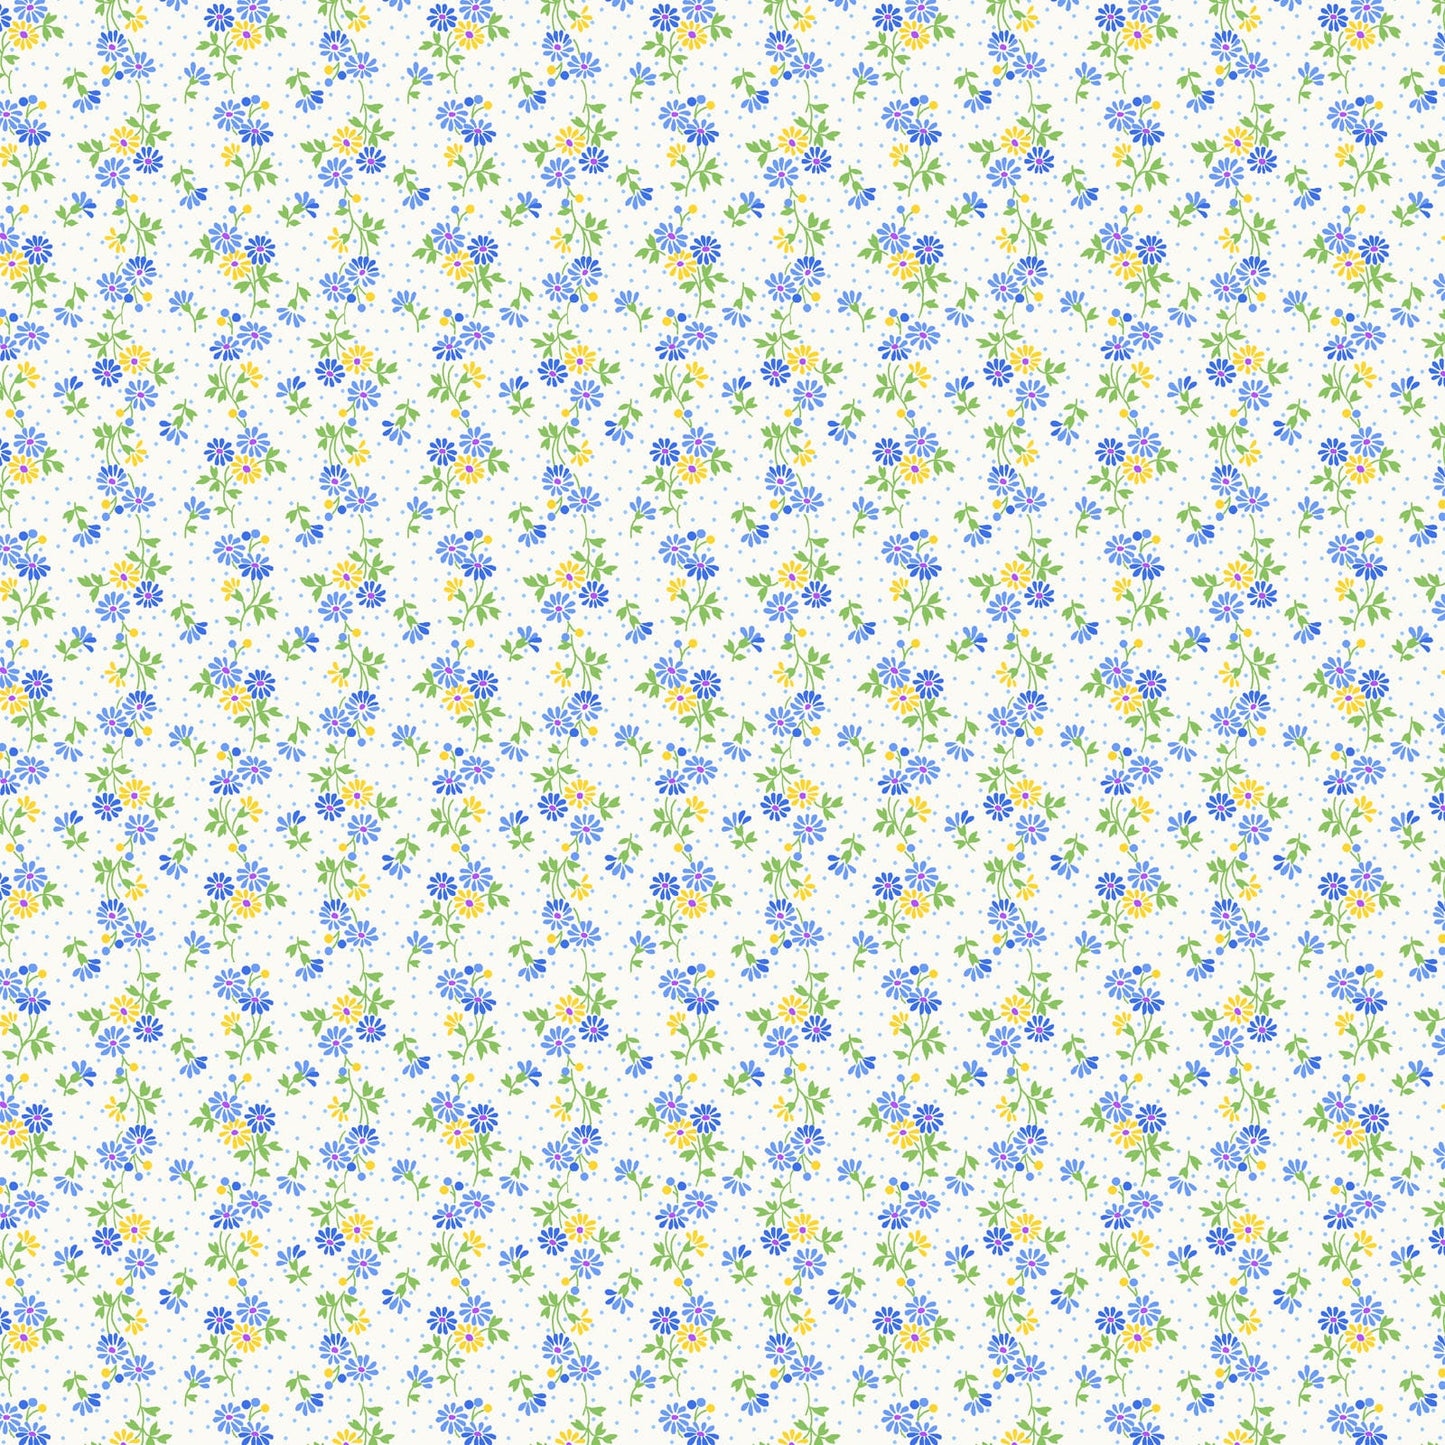 Nana Mae 7 Spaced Daisies in Ceam/Blue by Henry Glass. Continuous Cuts of Quilter's Cotton